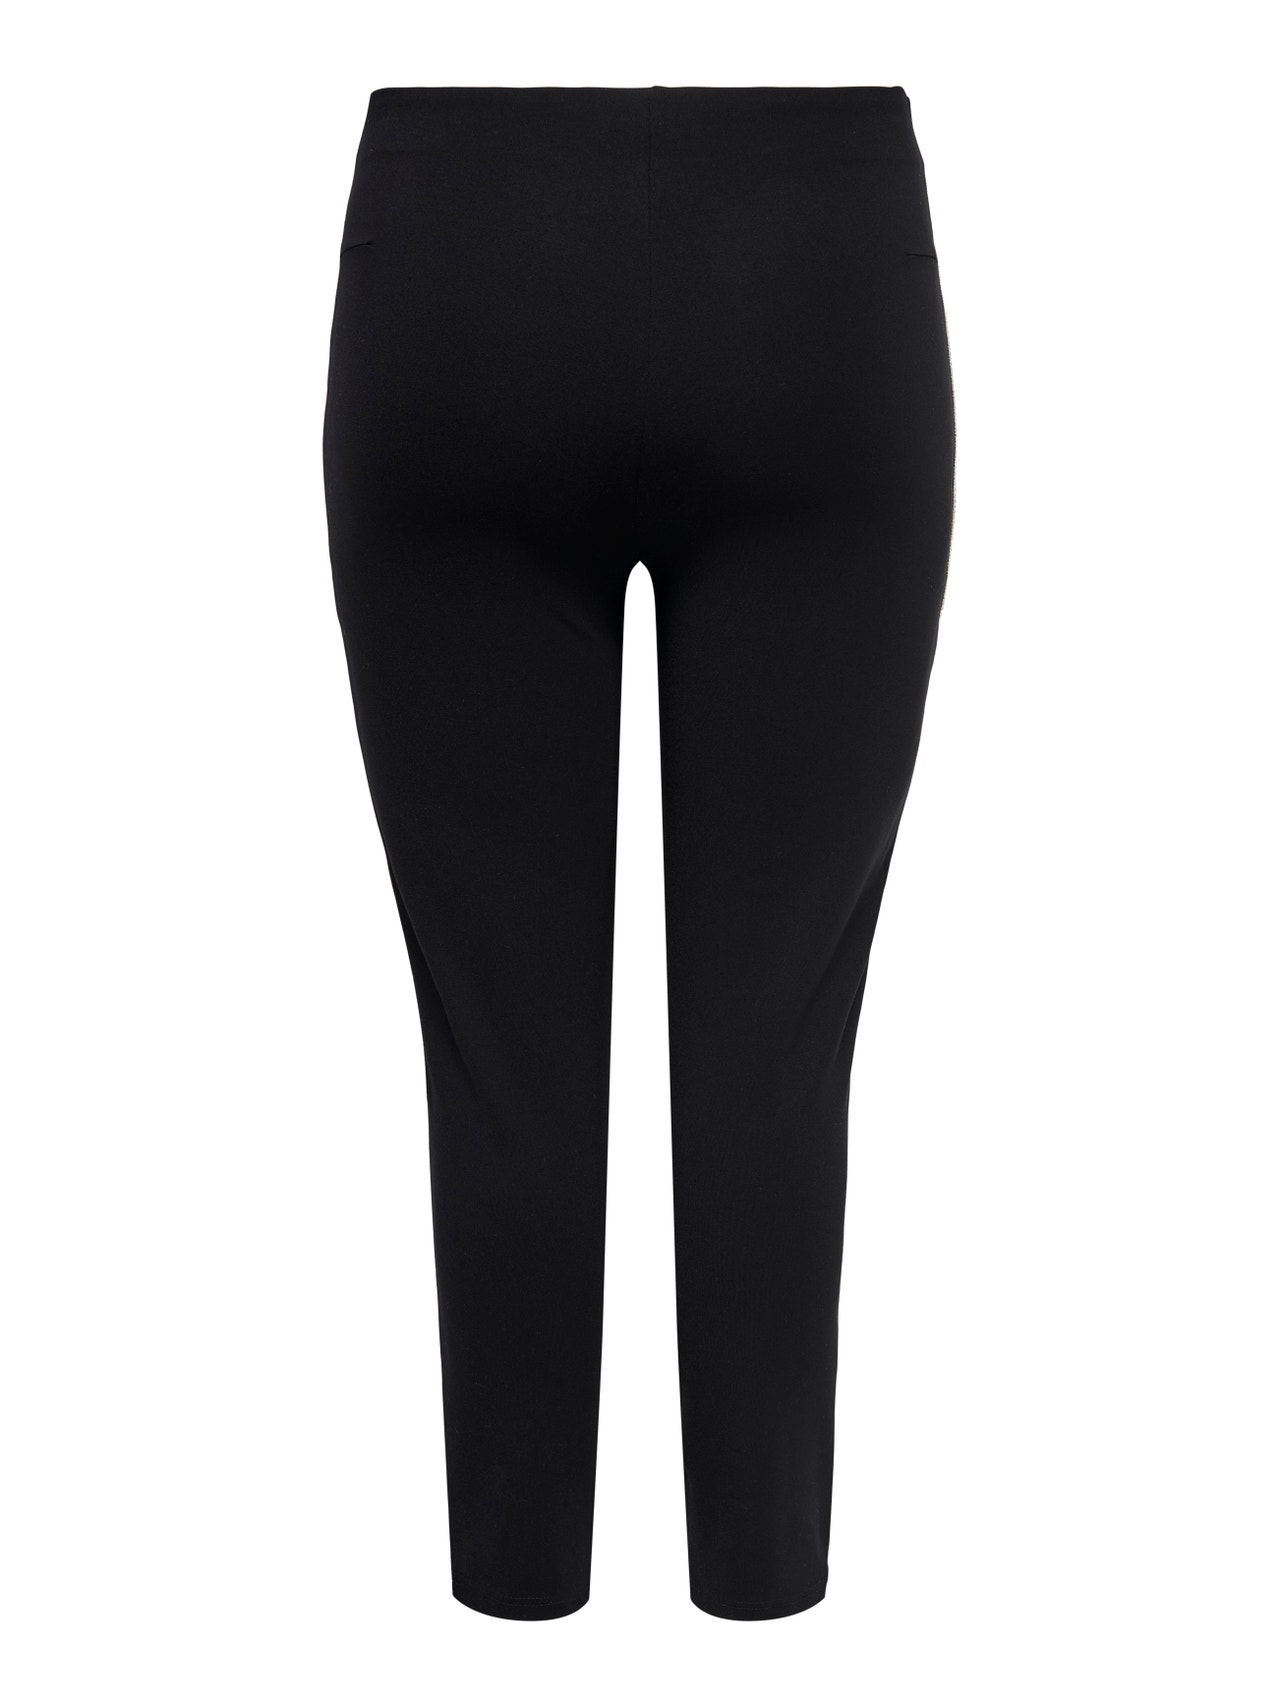 https://images.only.com/15278315/4073970/002/only-curvysolidcolorleggings-black.jpg?v=28cdfe3b16d077b3bd5e84cd19e3e182&format=webp&width=1280&quality=90&key=25-0-3